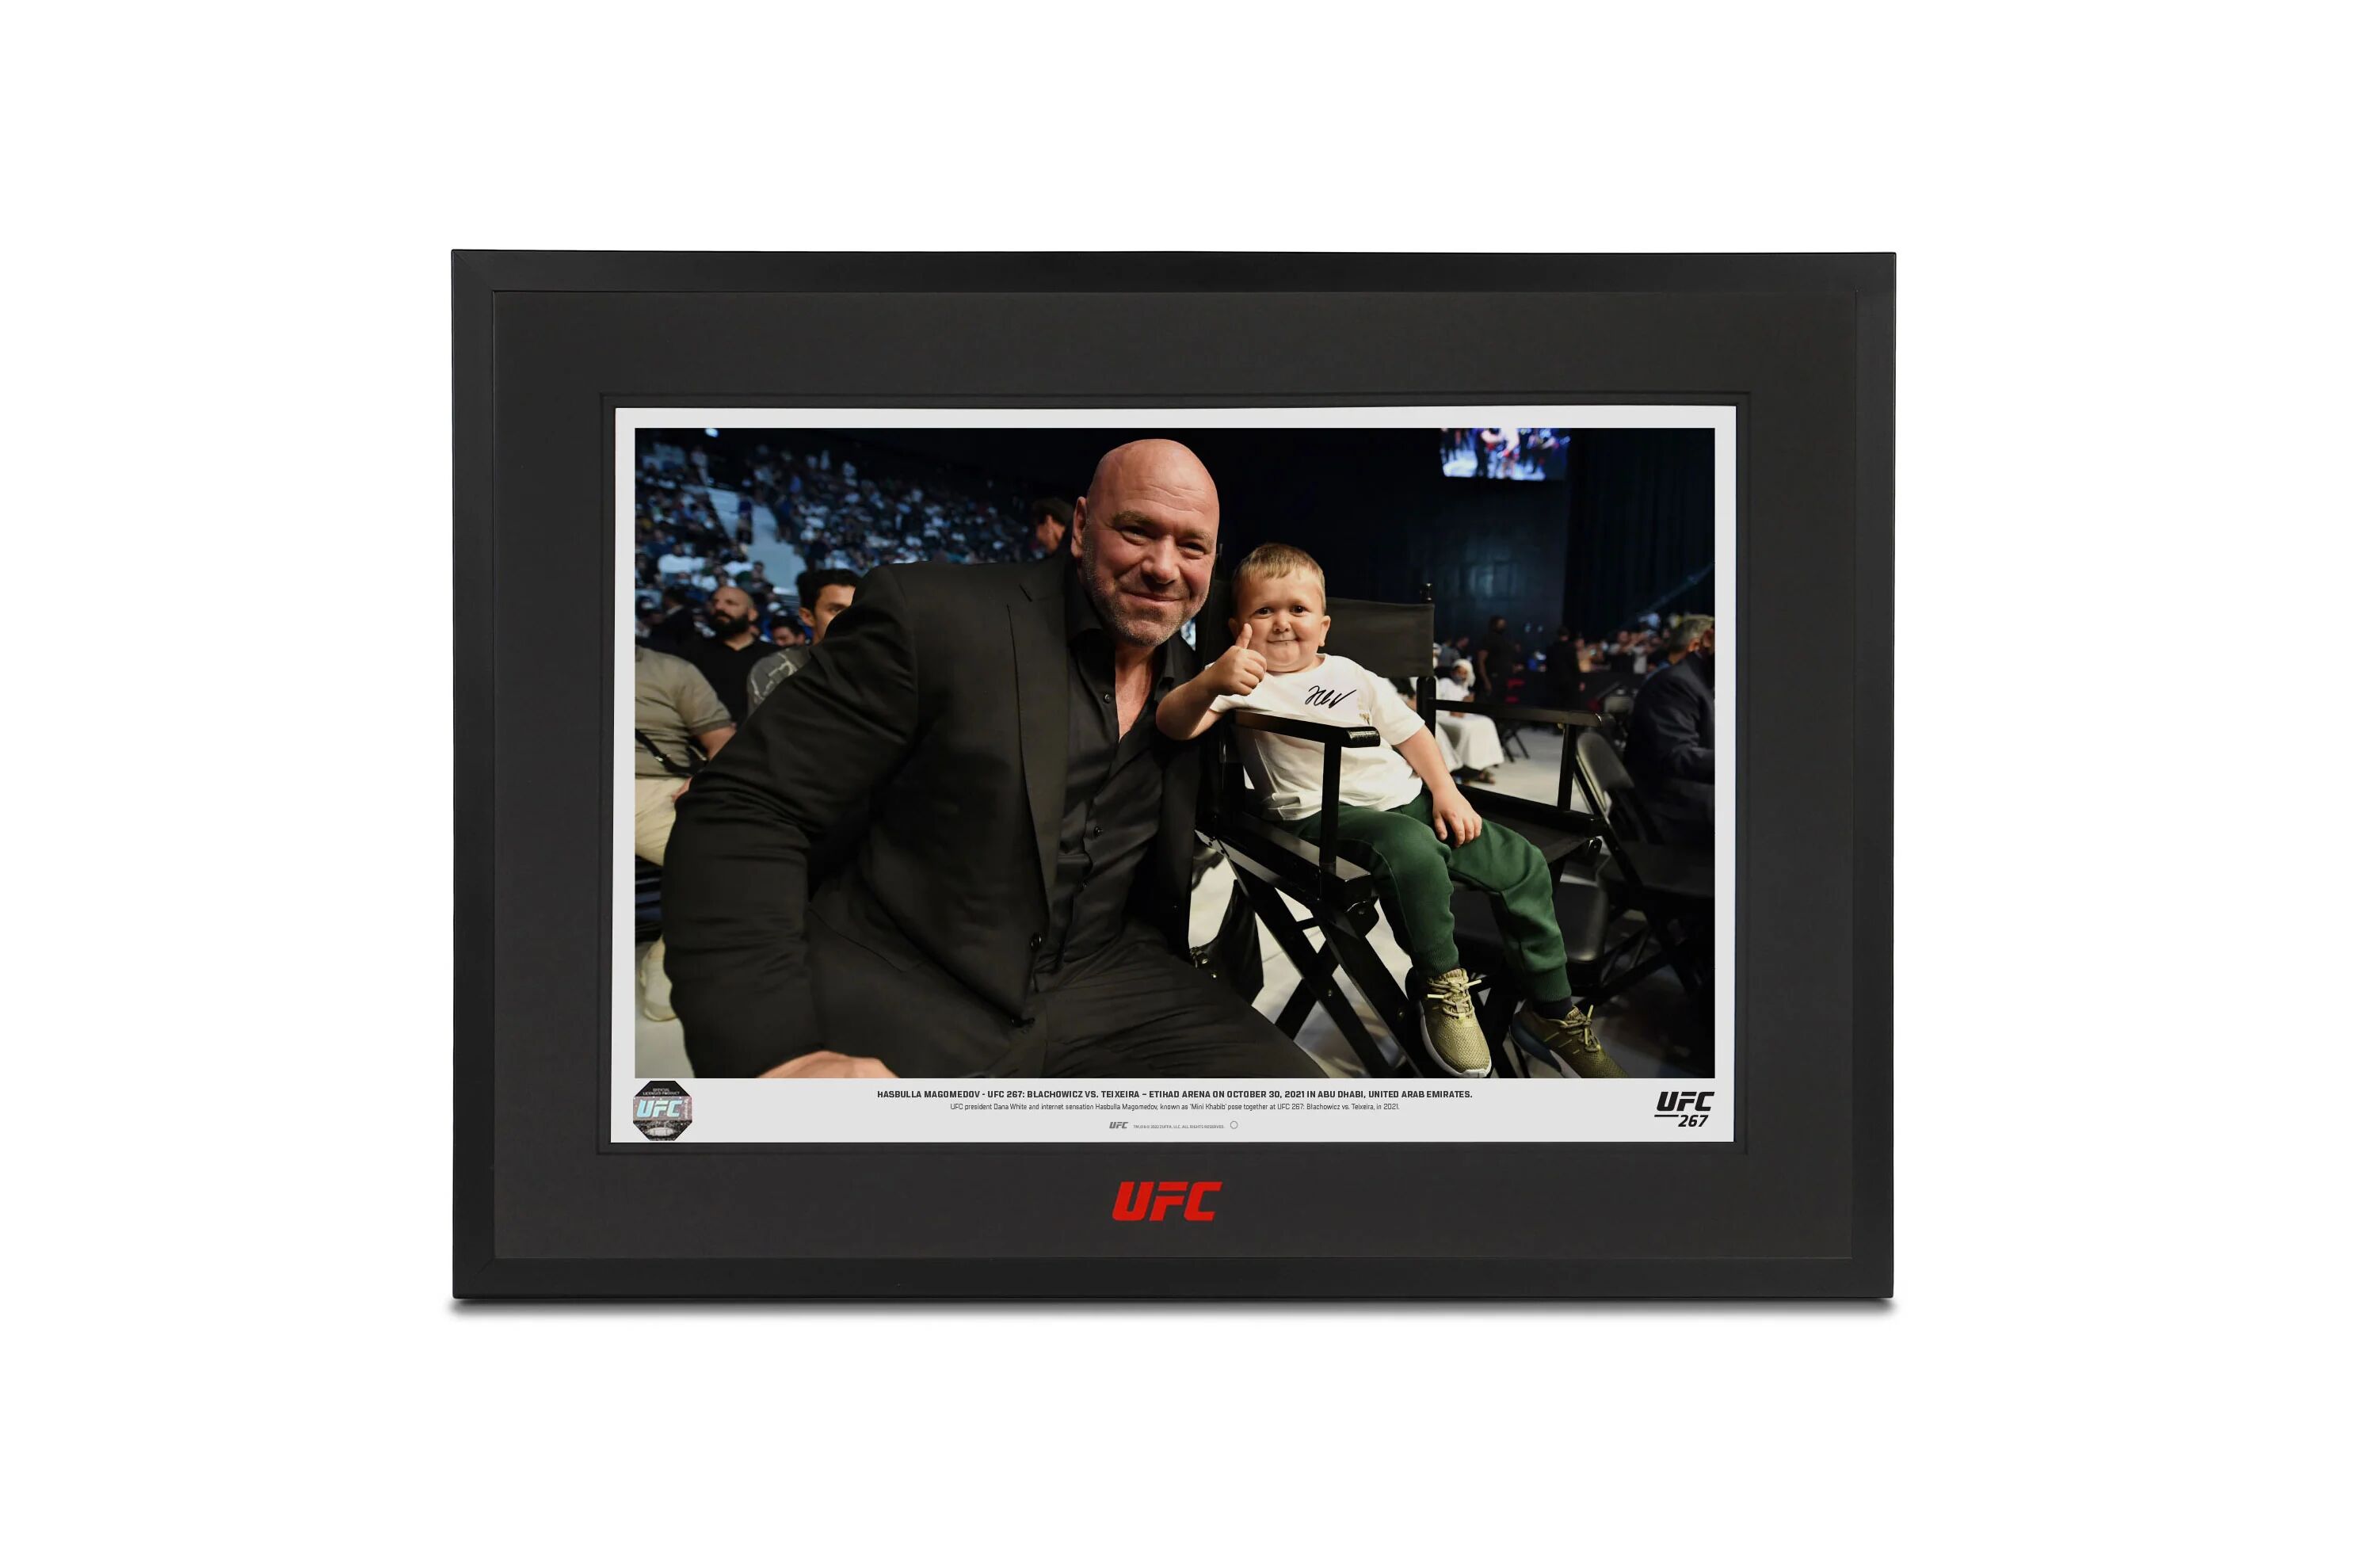 UFC Collectibles Hasbulla Signed Photo with Dana White